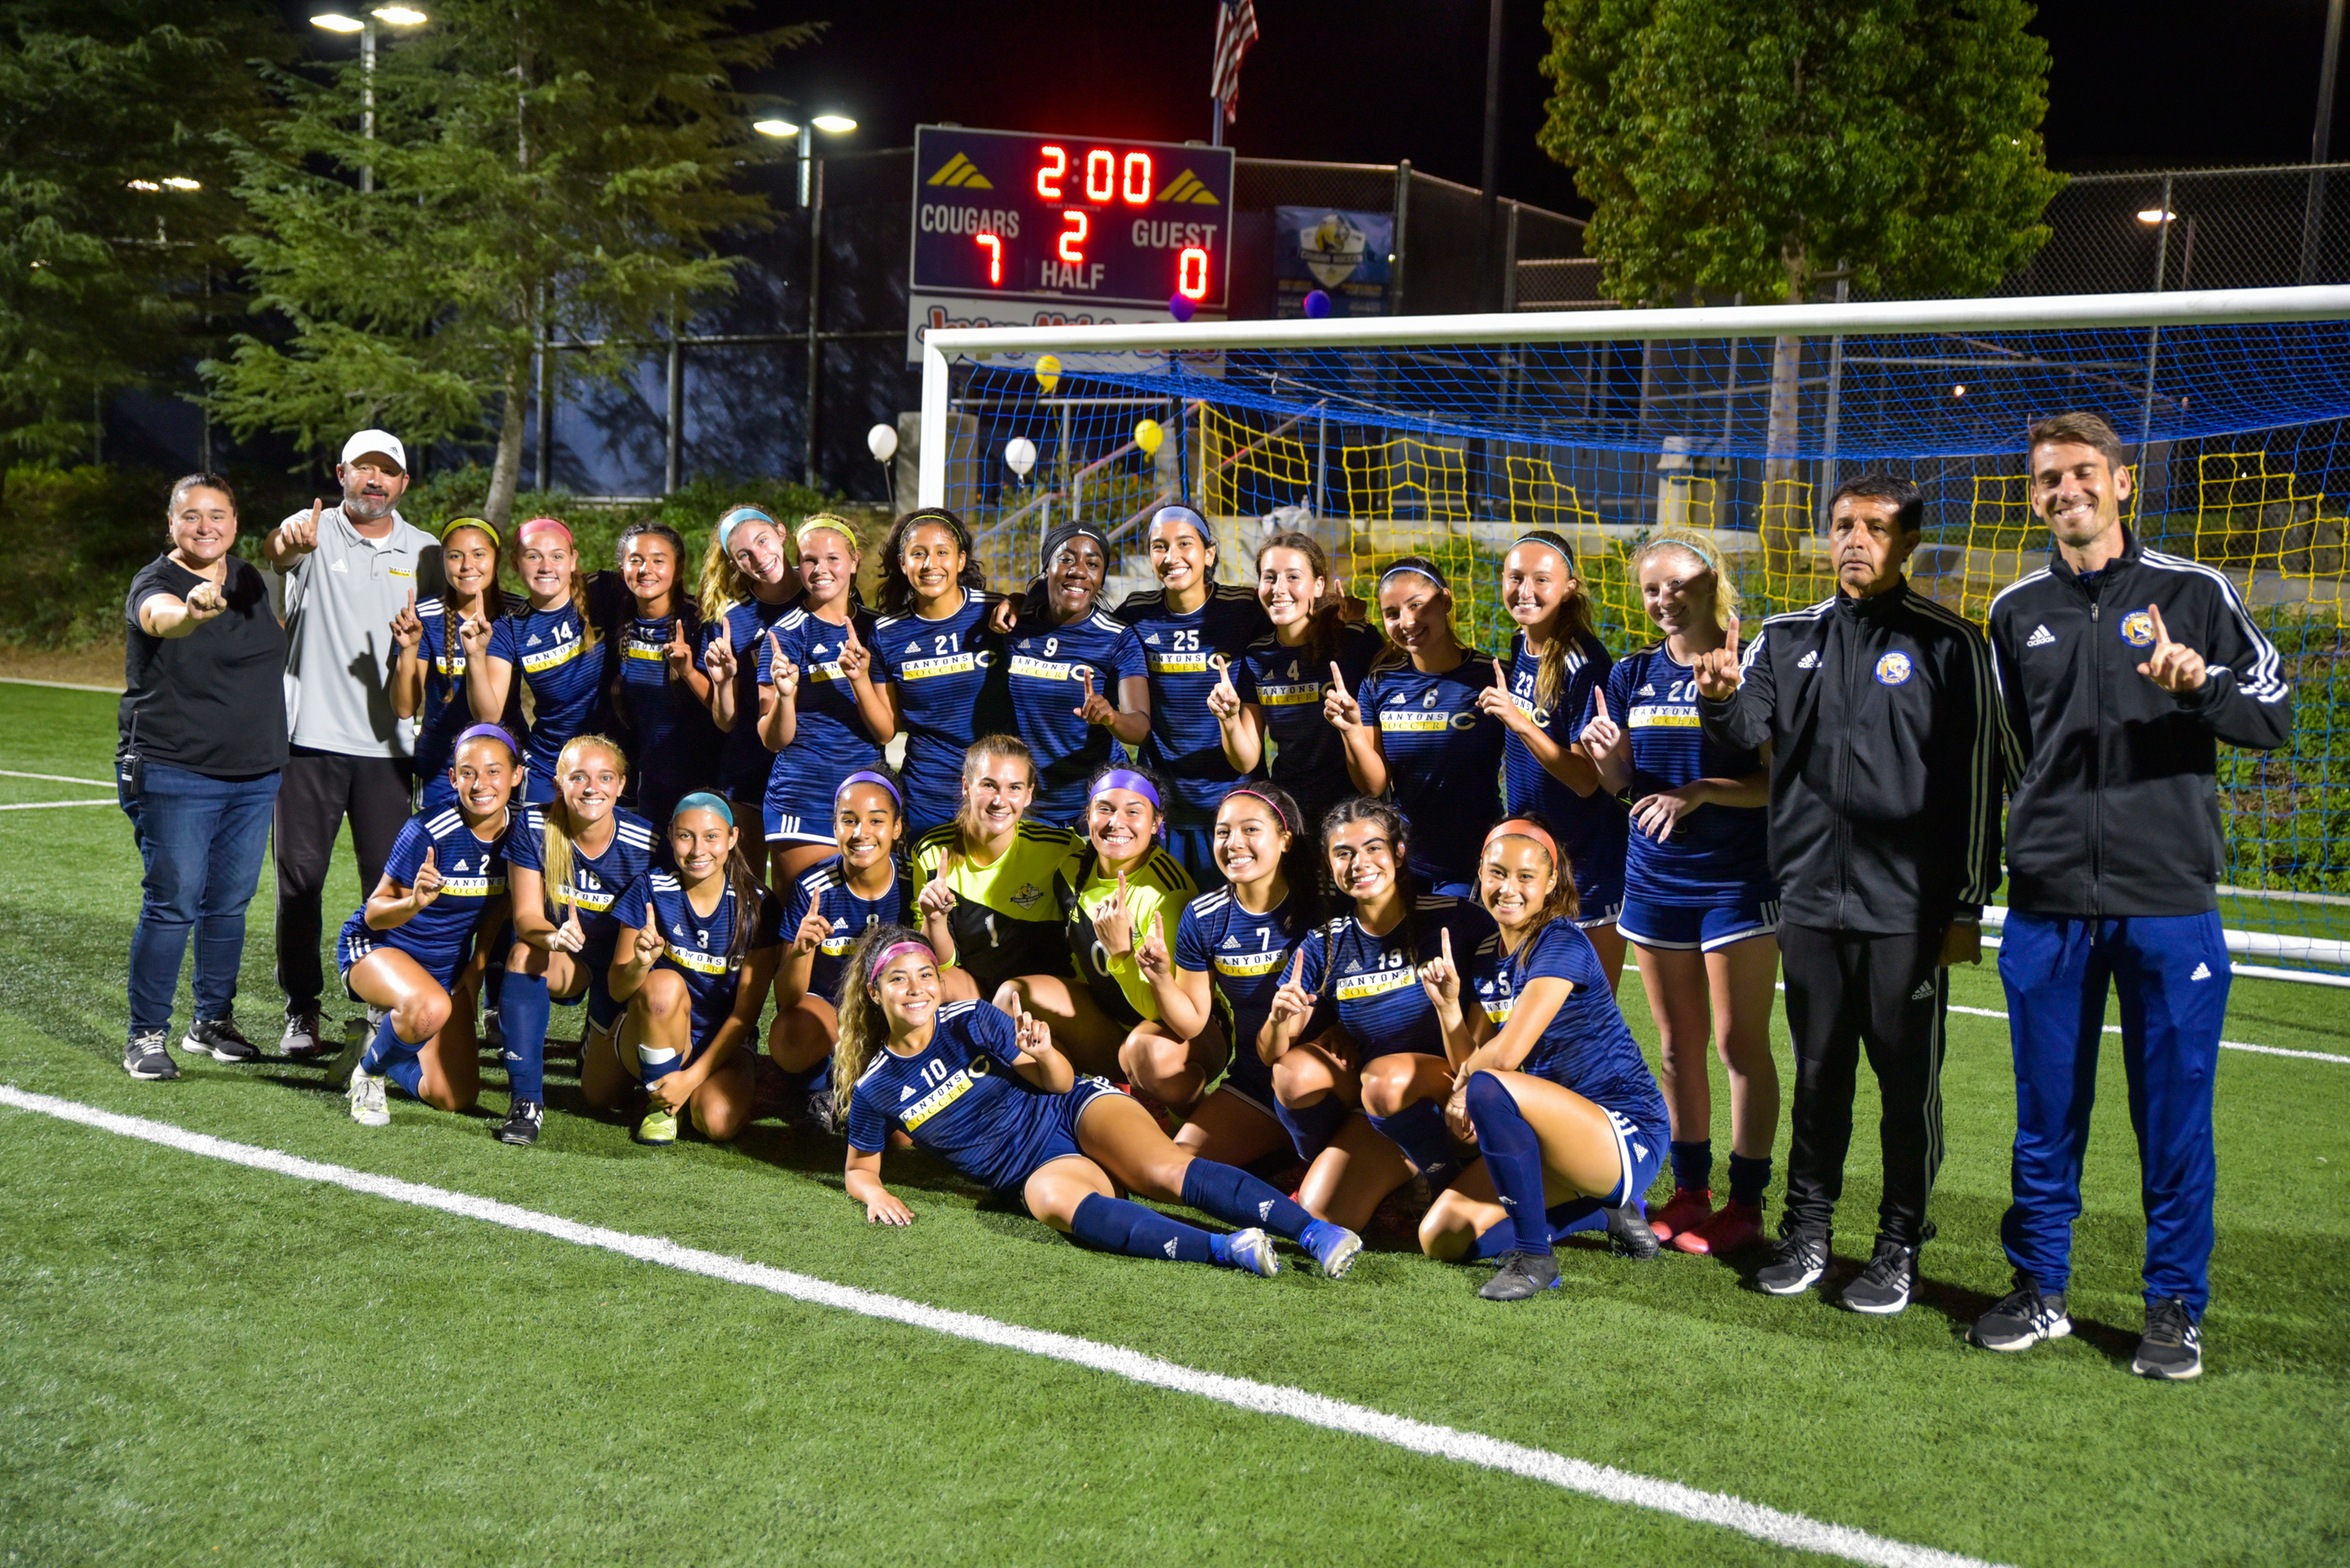 College of the Canyons clinched the 2021 Western State Conference (WSC), South Division championship with a 7-0 victory over West L.A. College during 'Sophomore Night' last Friday. The title was the program's 12th overall and first since 2017. — Mari Kneisel/COC Sports Information